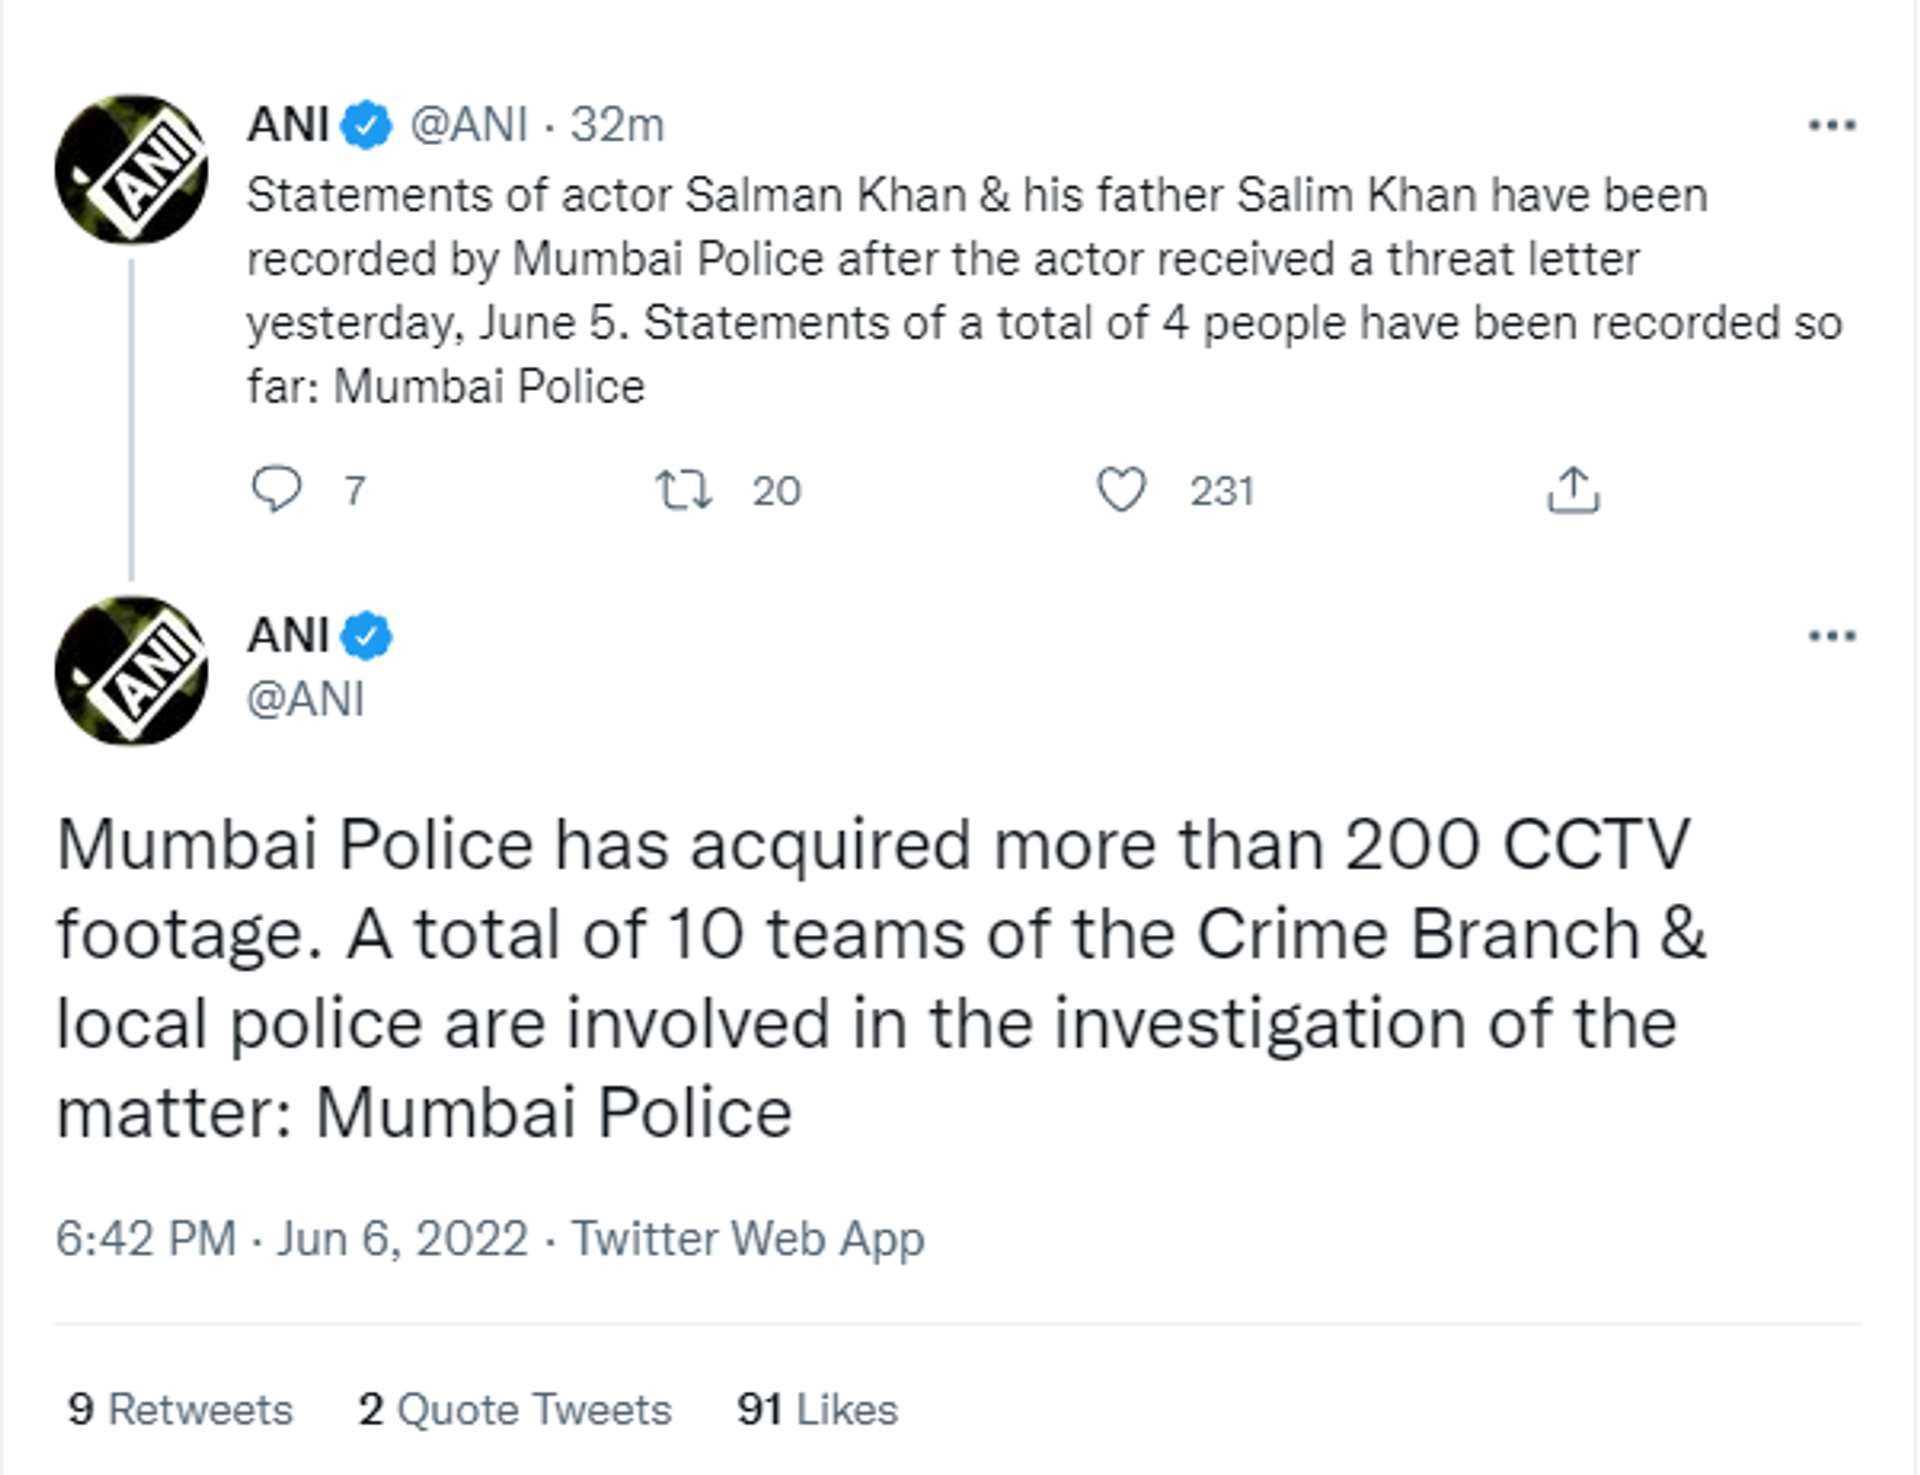 Mumbai Police records statements of Bollywood superstar Salman Khan and his father Salim Khan after they received death threat - Sputnik International, 1920, 06.06.2022